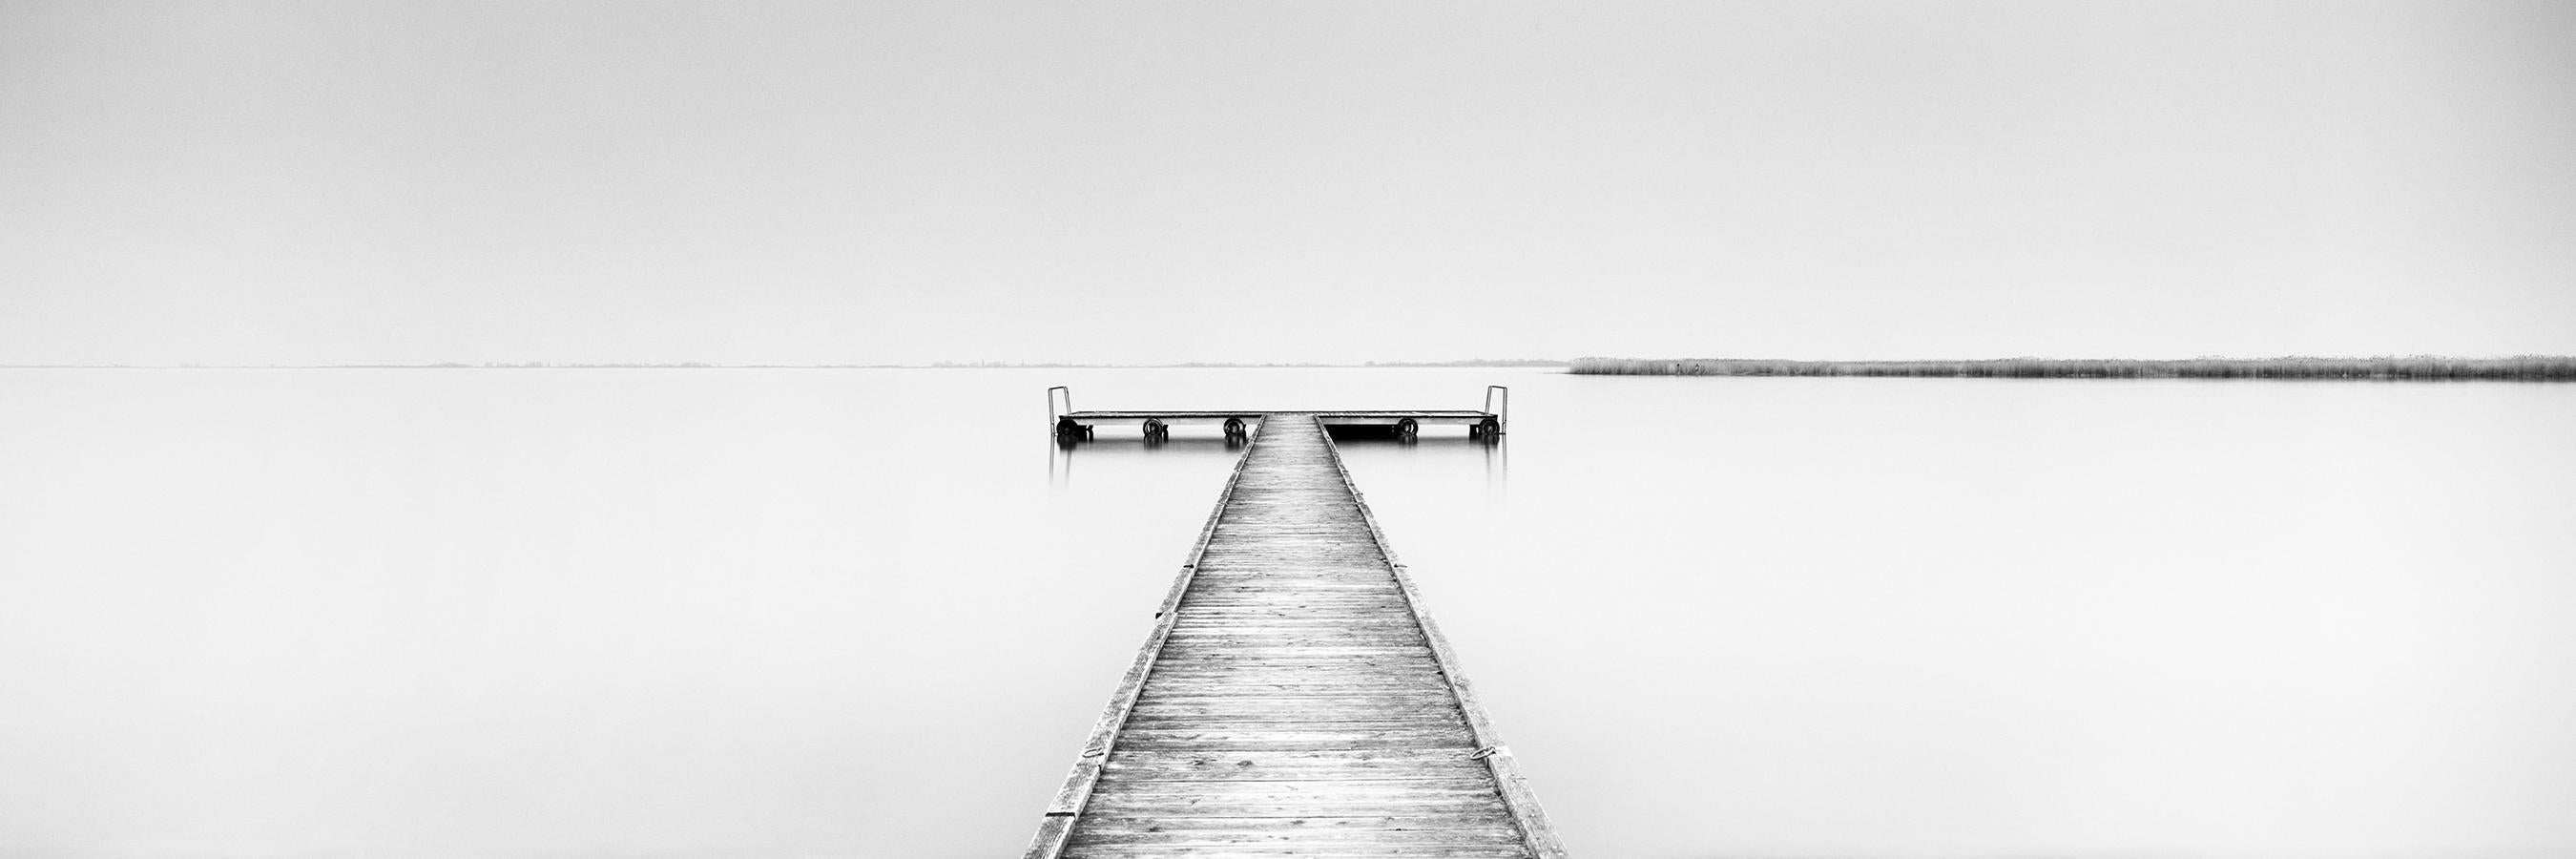 Wood Pier Panorama, minimalist black and white waterscape photography art print